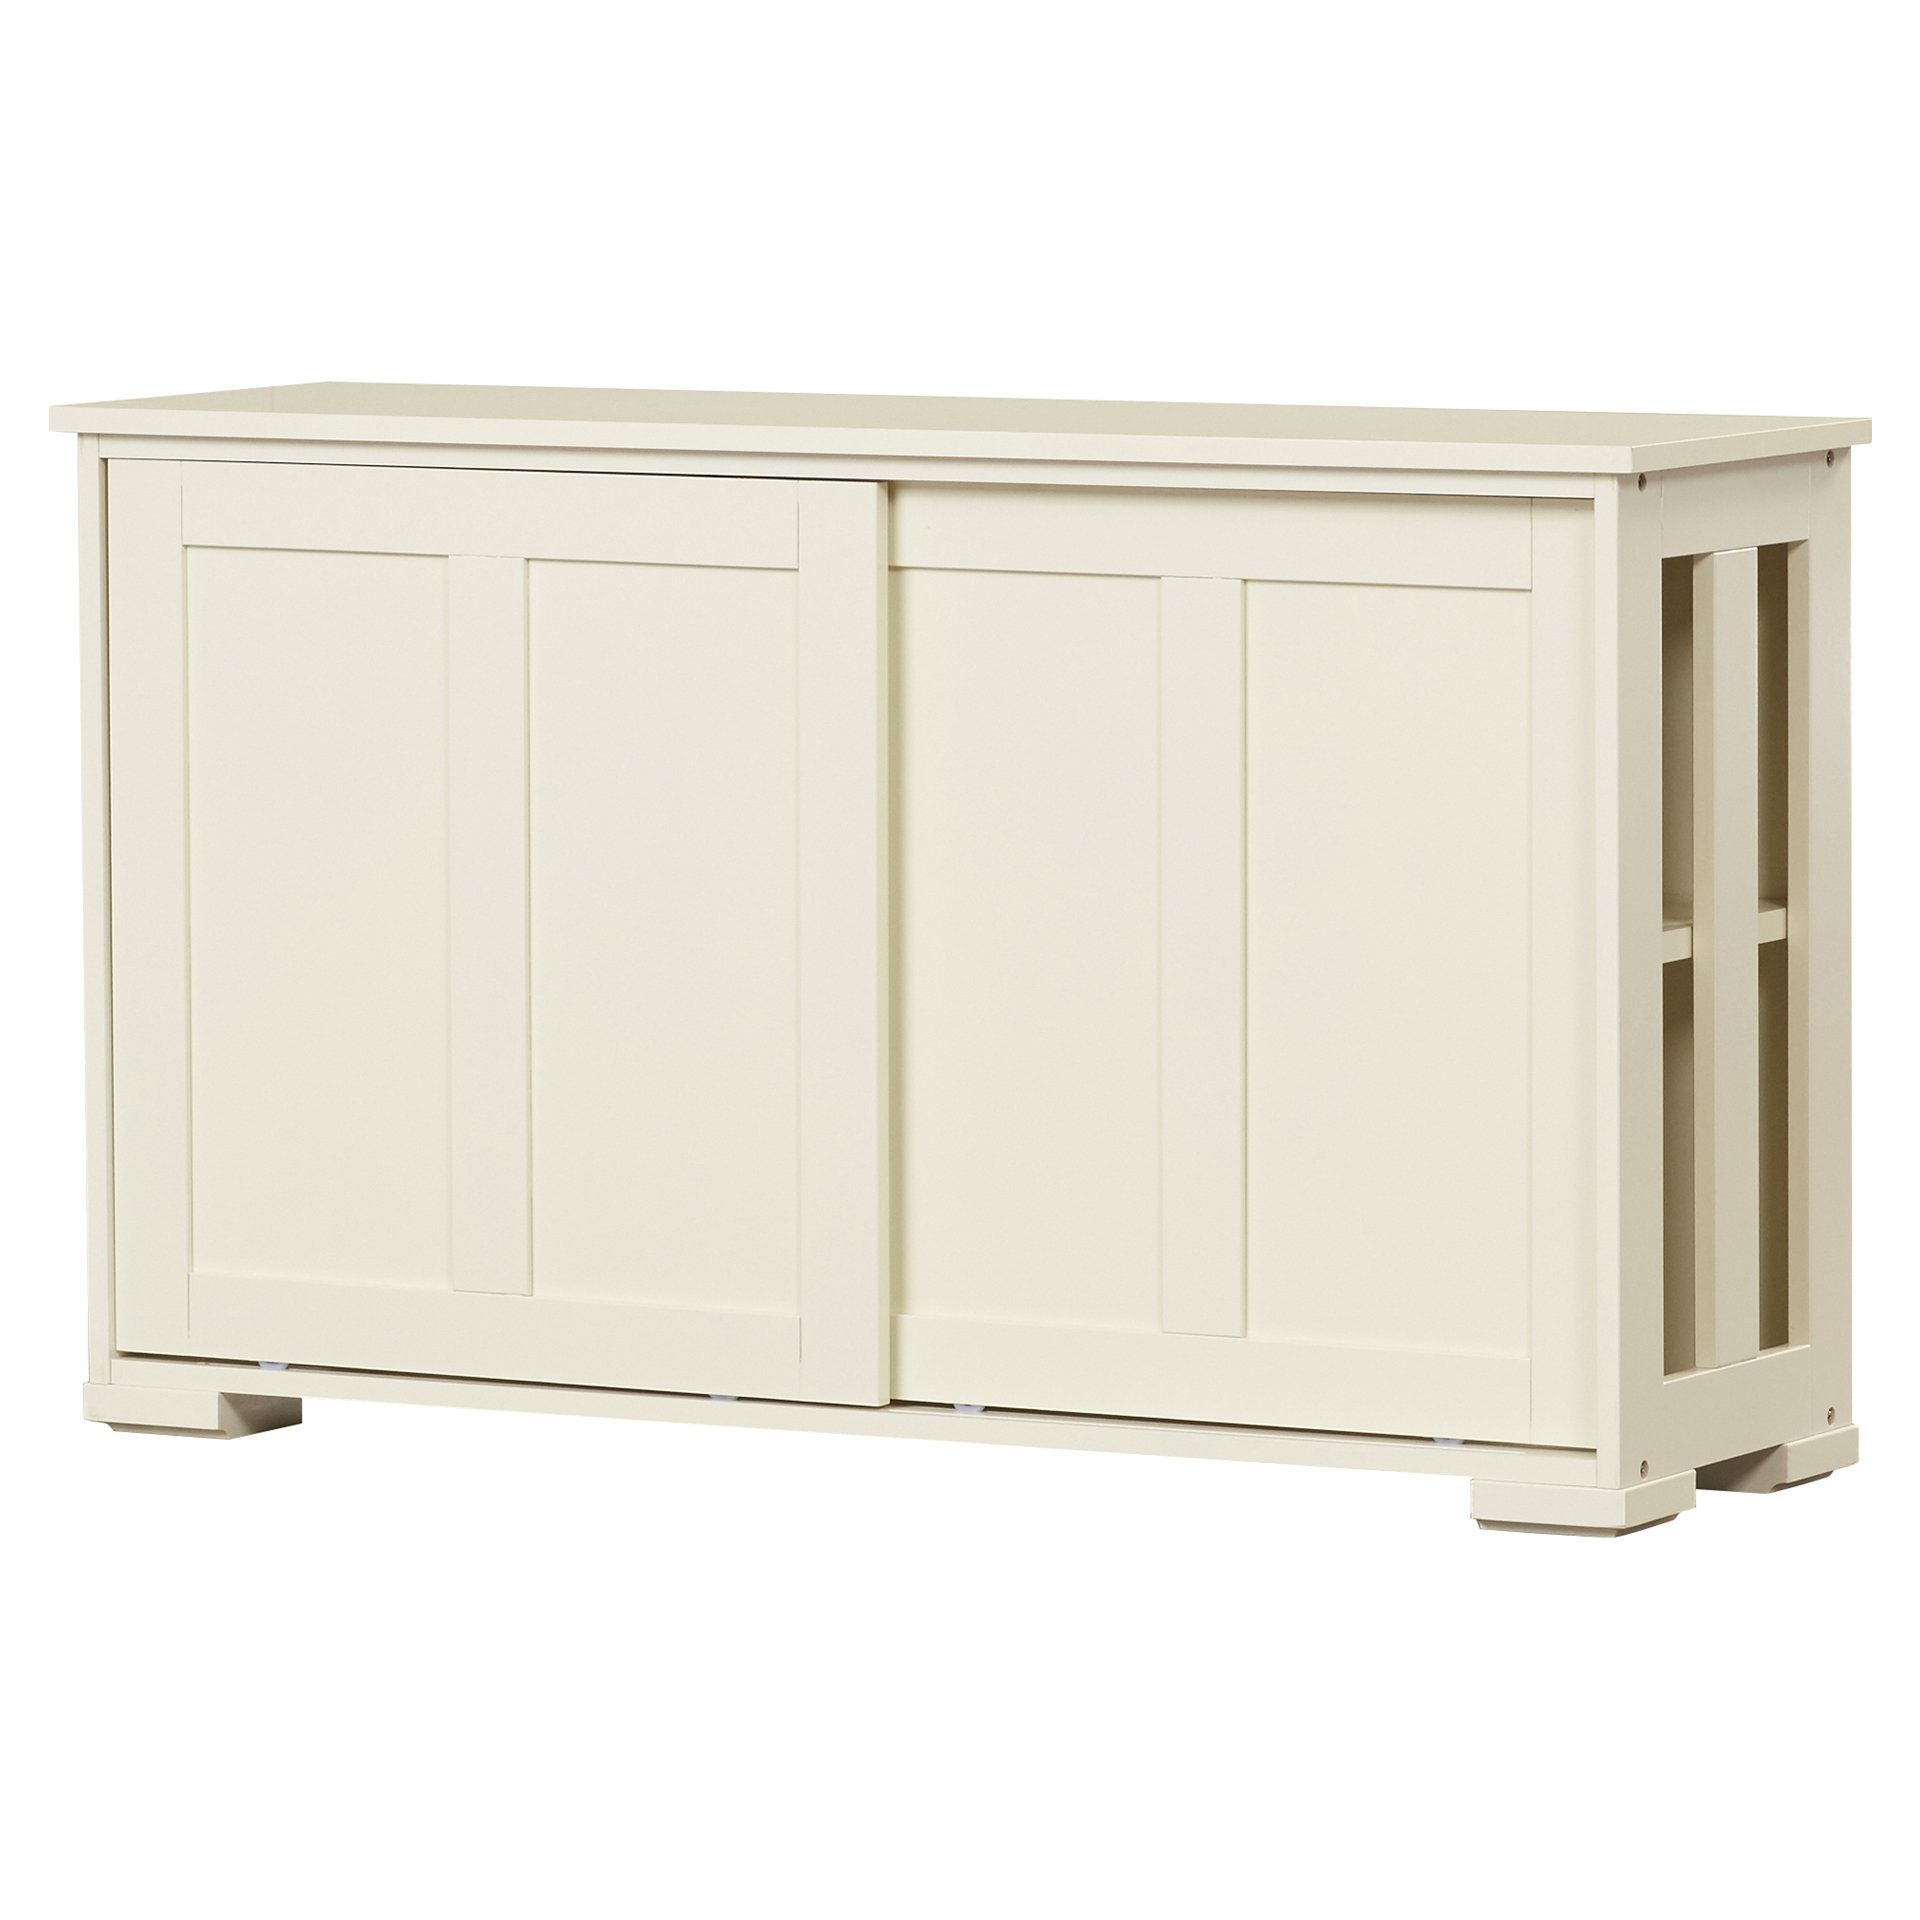 Sideboards & Credenzas | Joss & Main Pertaining To Lainey Credenzas (View 24 of 30)